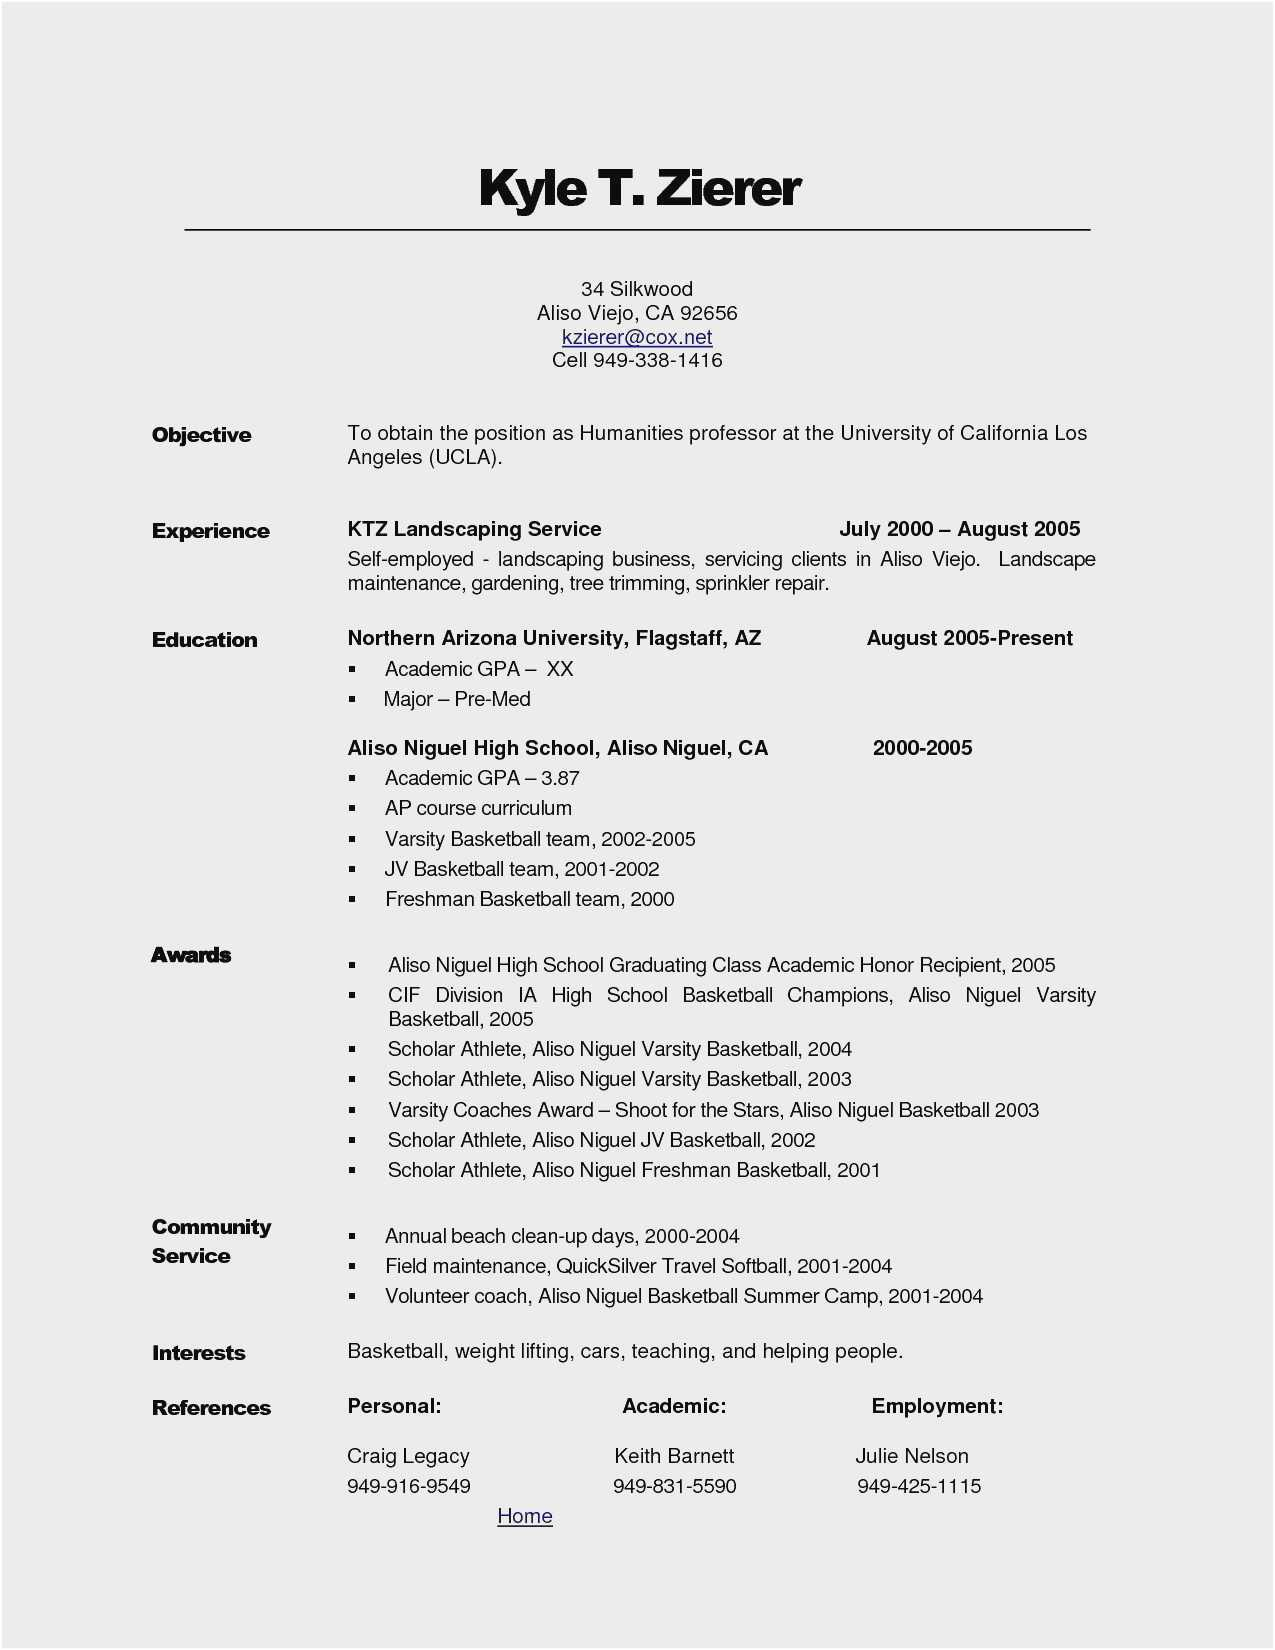 Resume Objective Sample for High School Graduate Free Collection 56 High School Resume Objective New